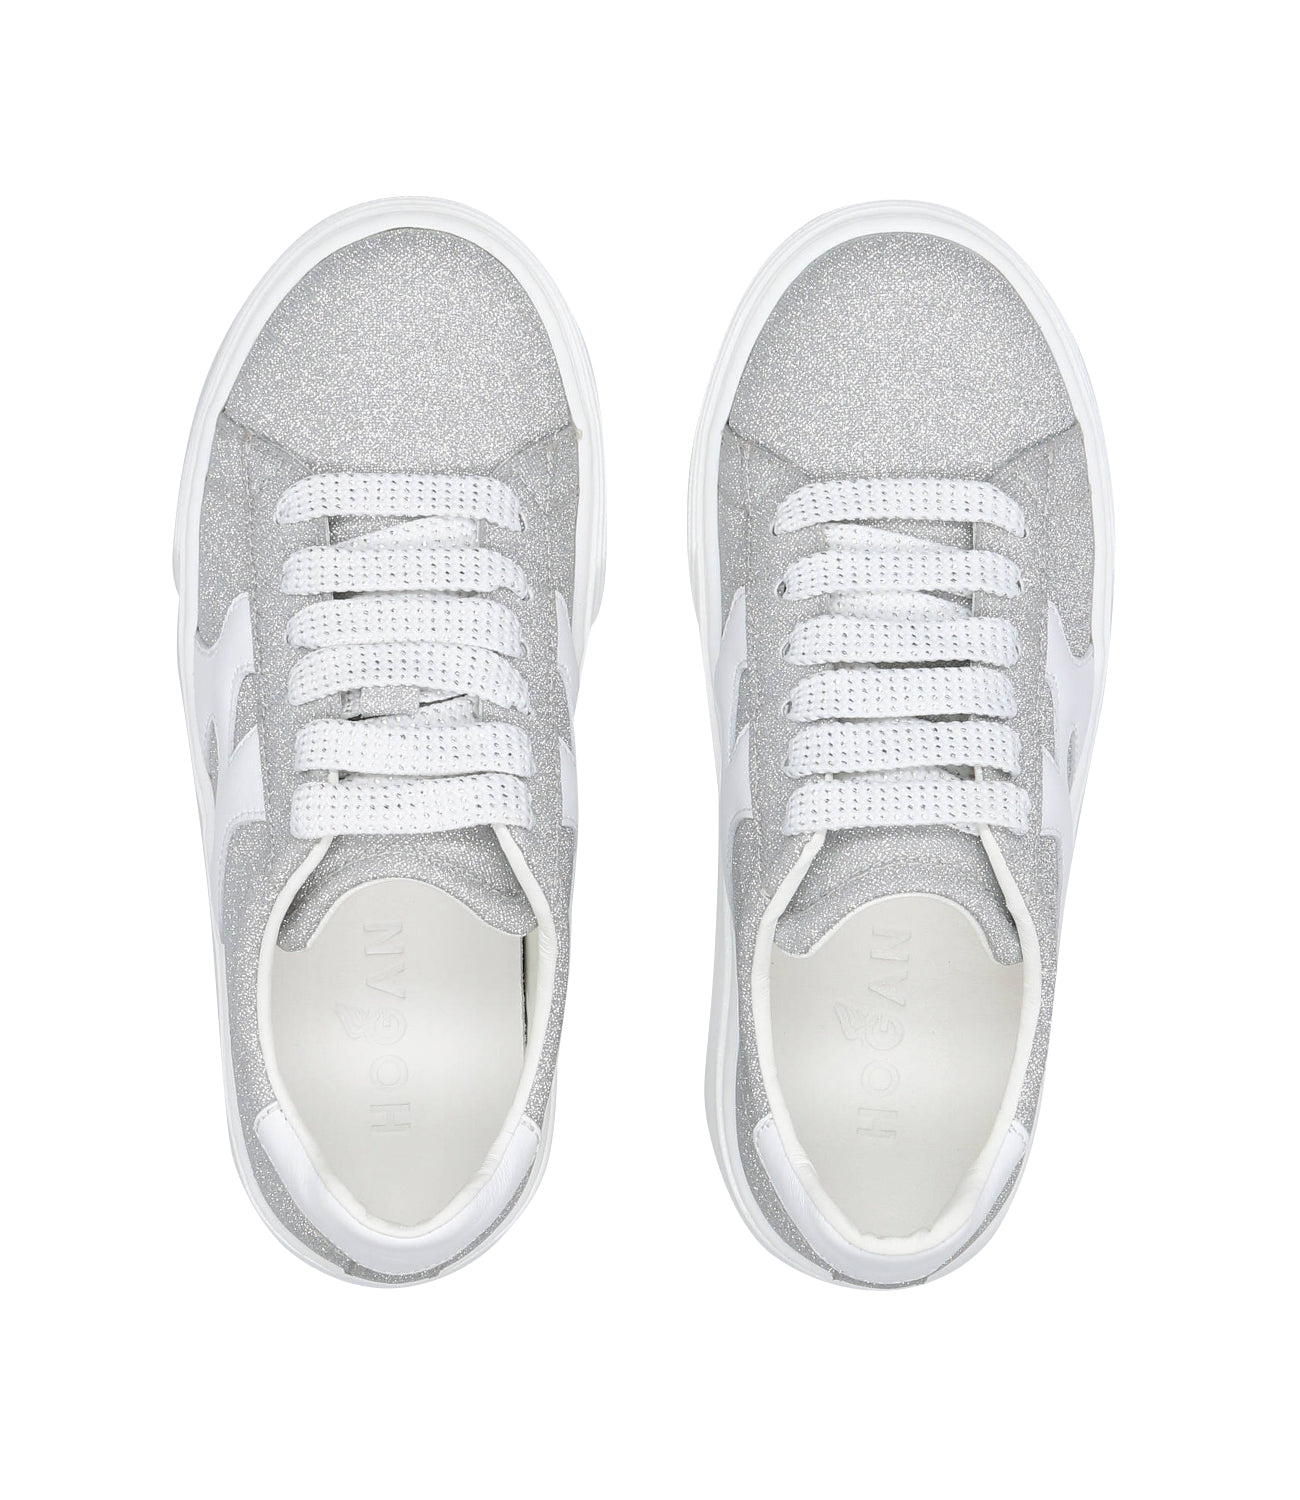 Hogan Junior | Sneakers H365 Silver and White